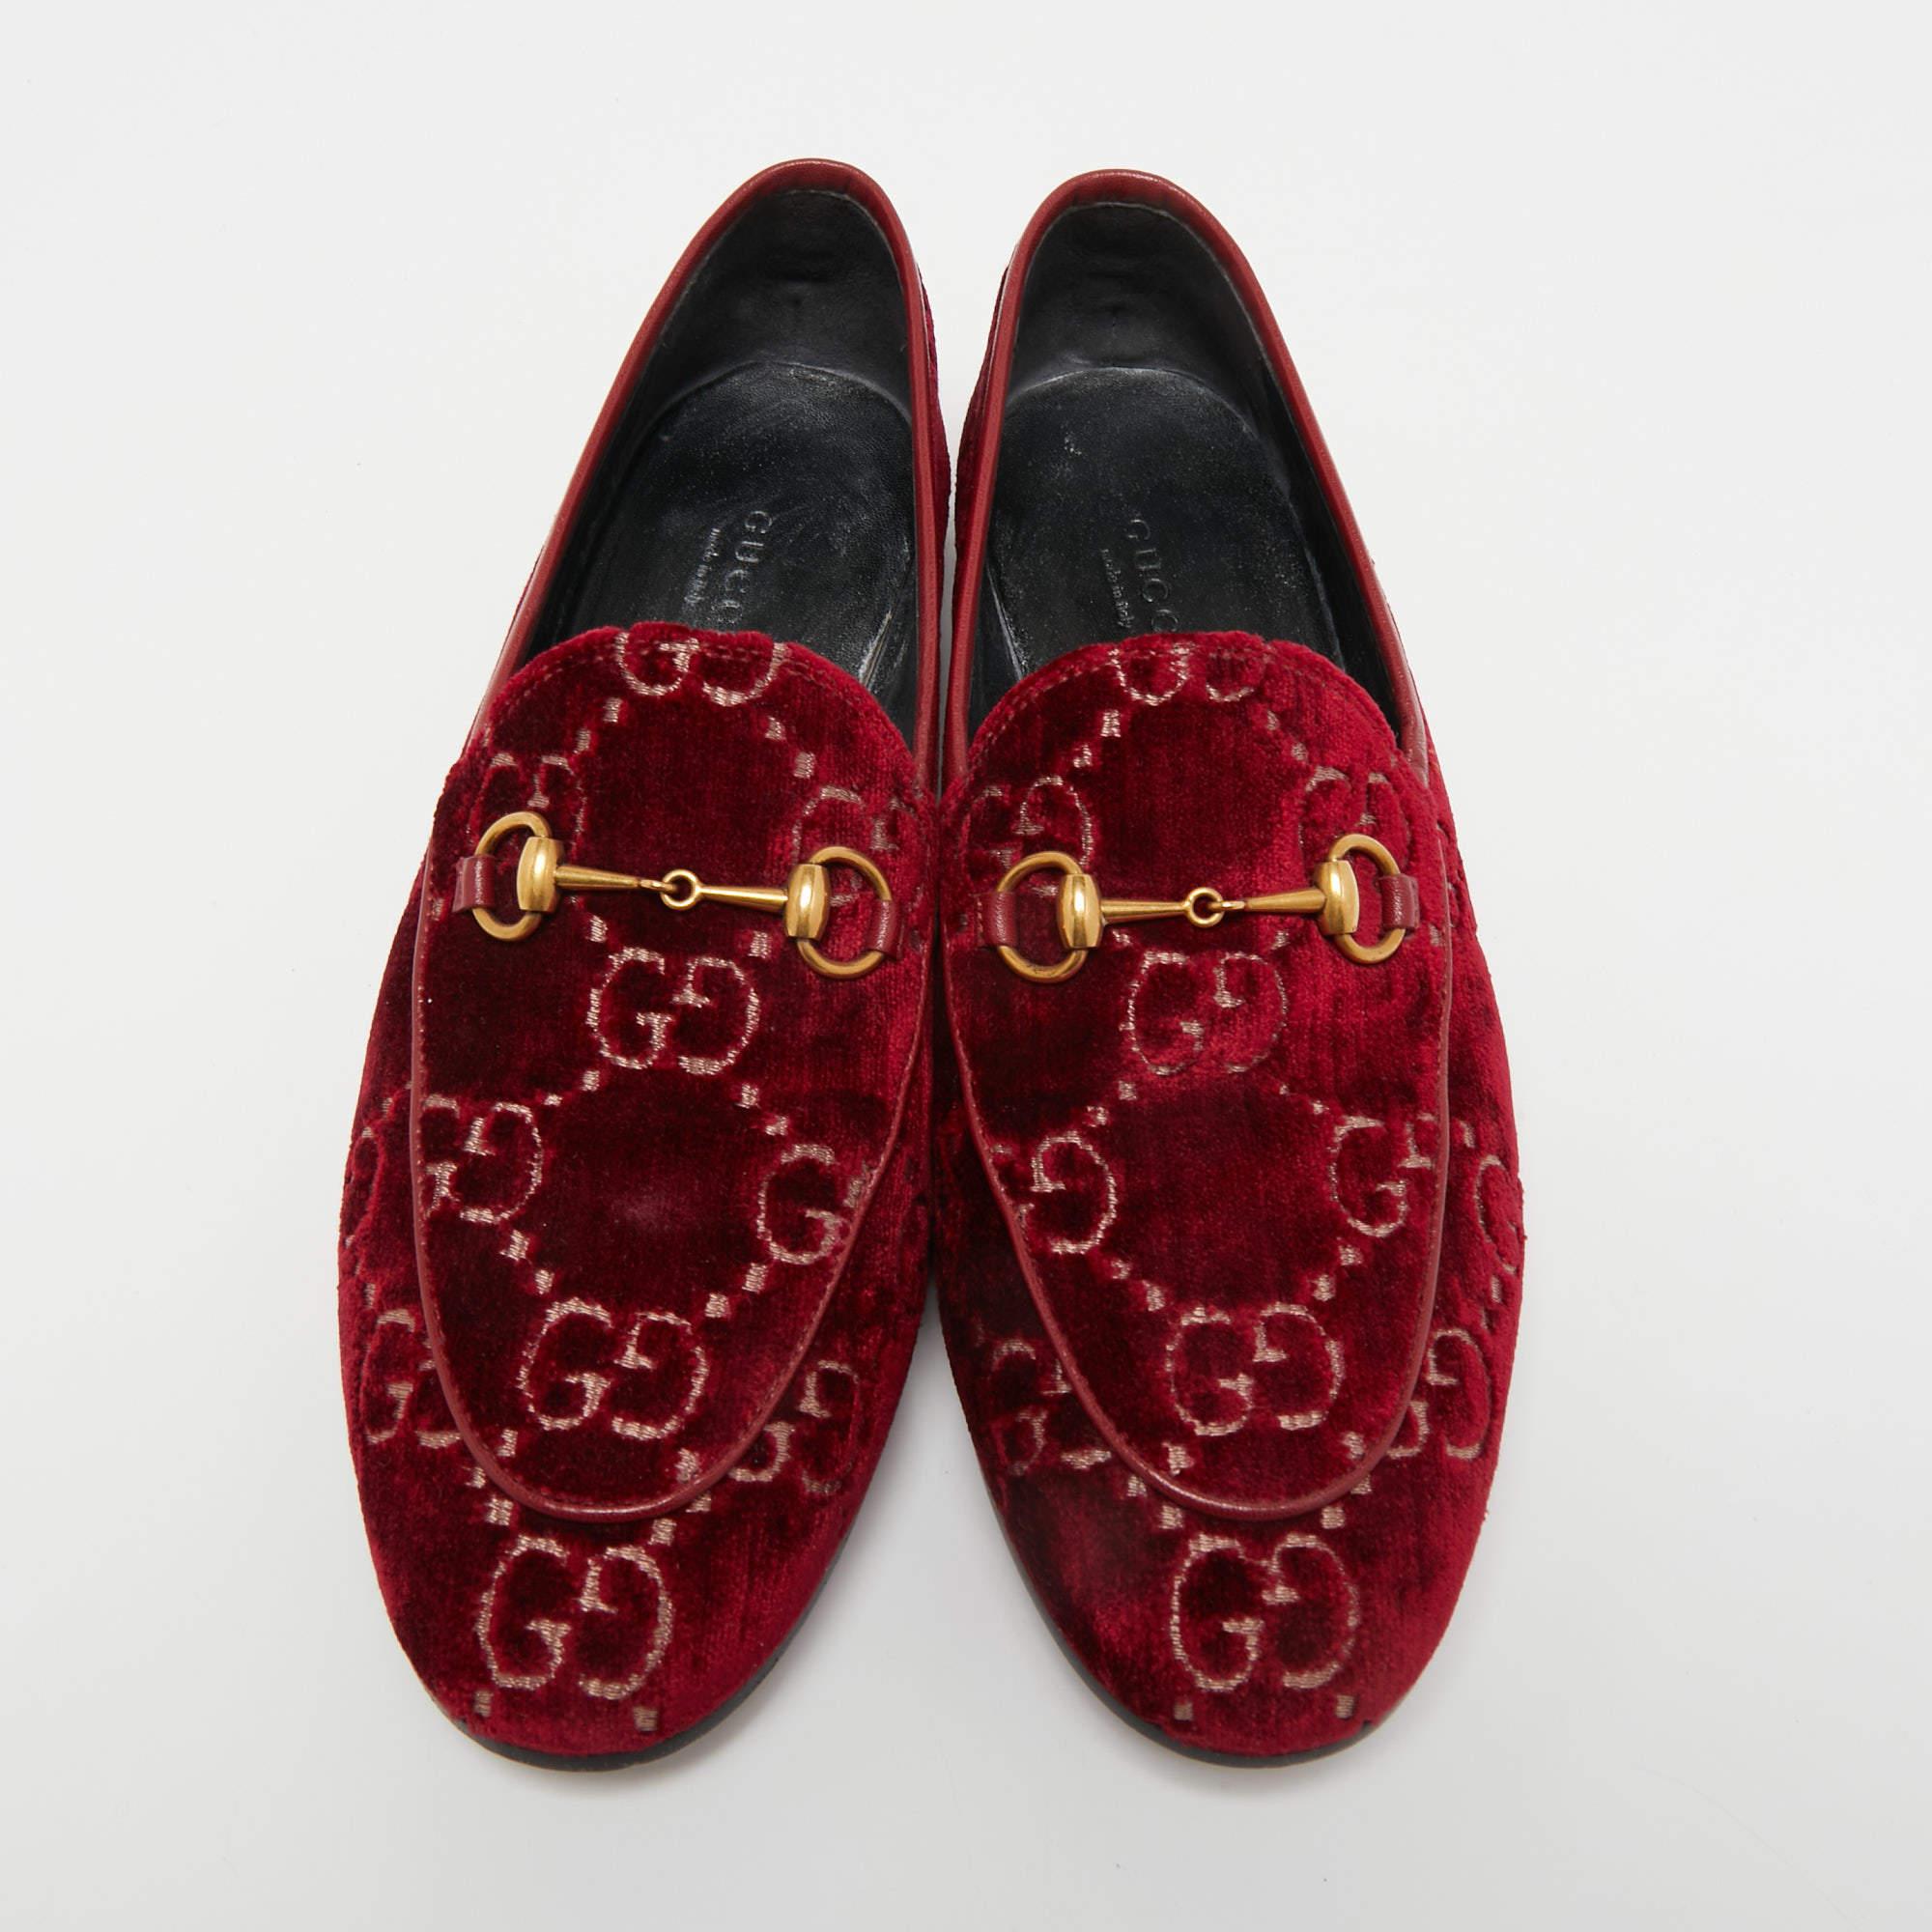 The Jordaan is a shoe that has a modern finish and a signature appeal. It has an elongated toe and the Gucci Horsebit motif gracing the uppers. This pair is crafted from GG velvet and sewn with utmost care to cover your feet with